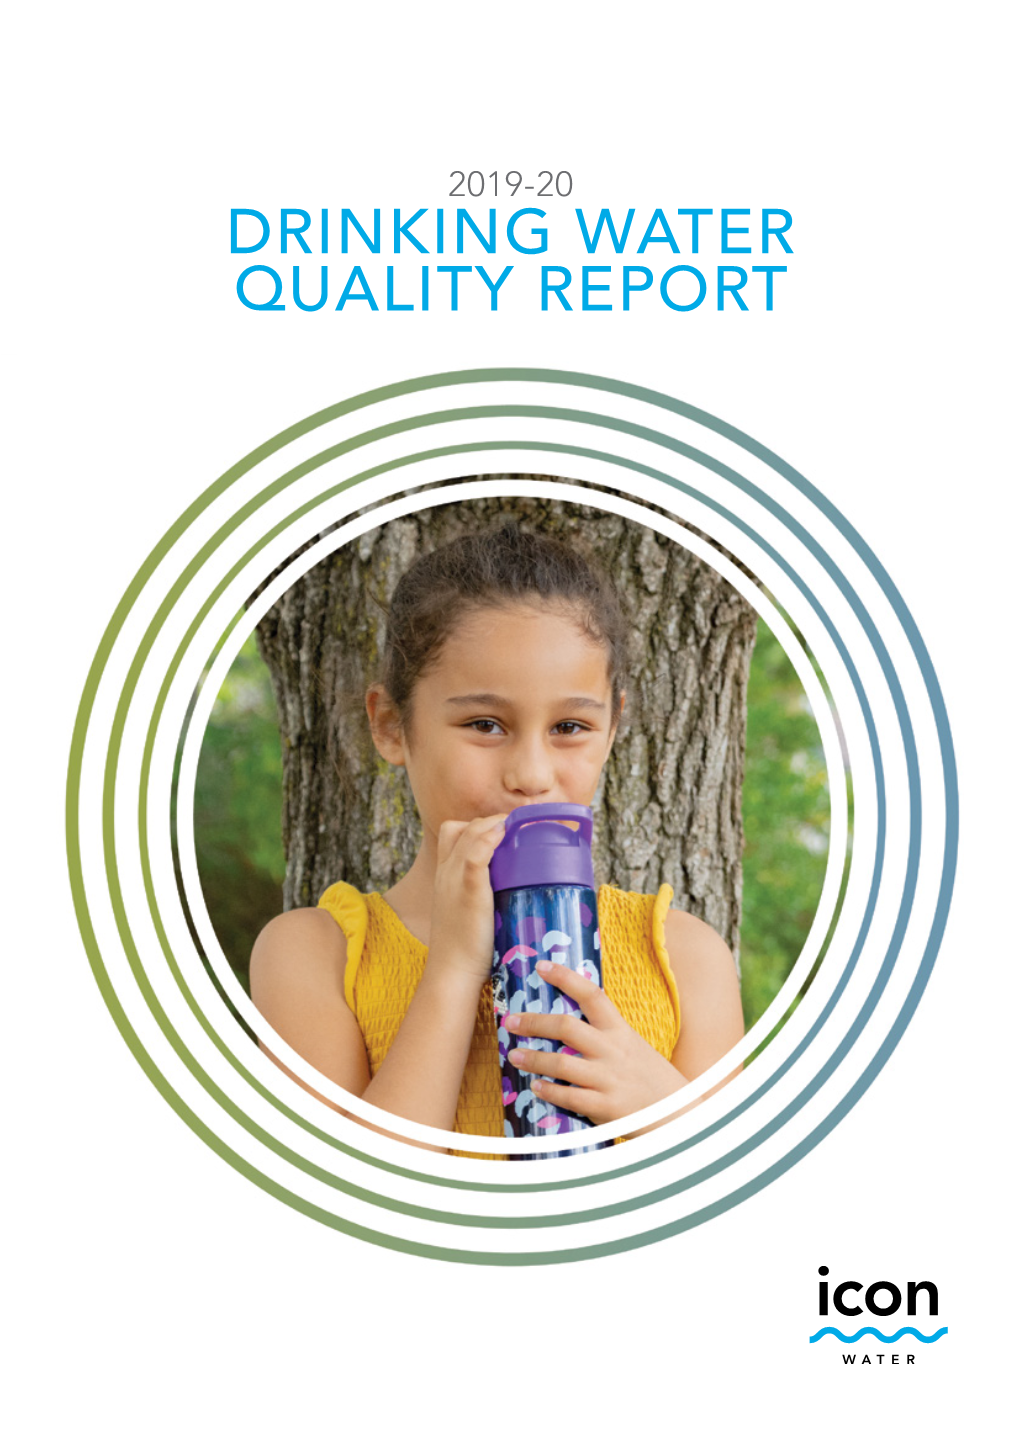 Annual Drinking Water Quality Report